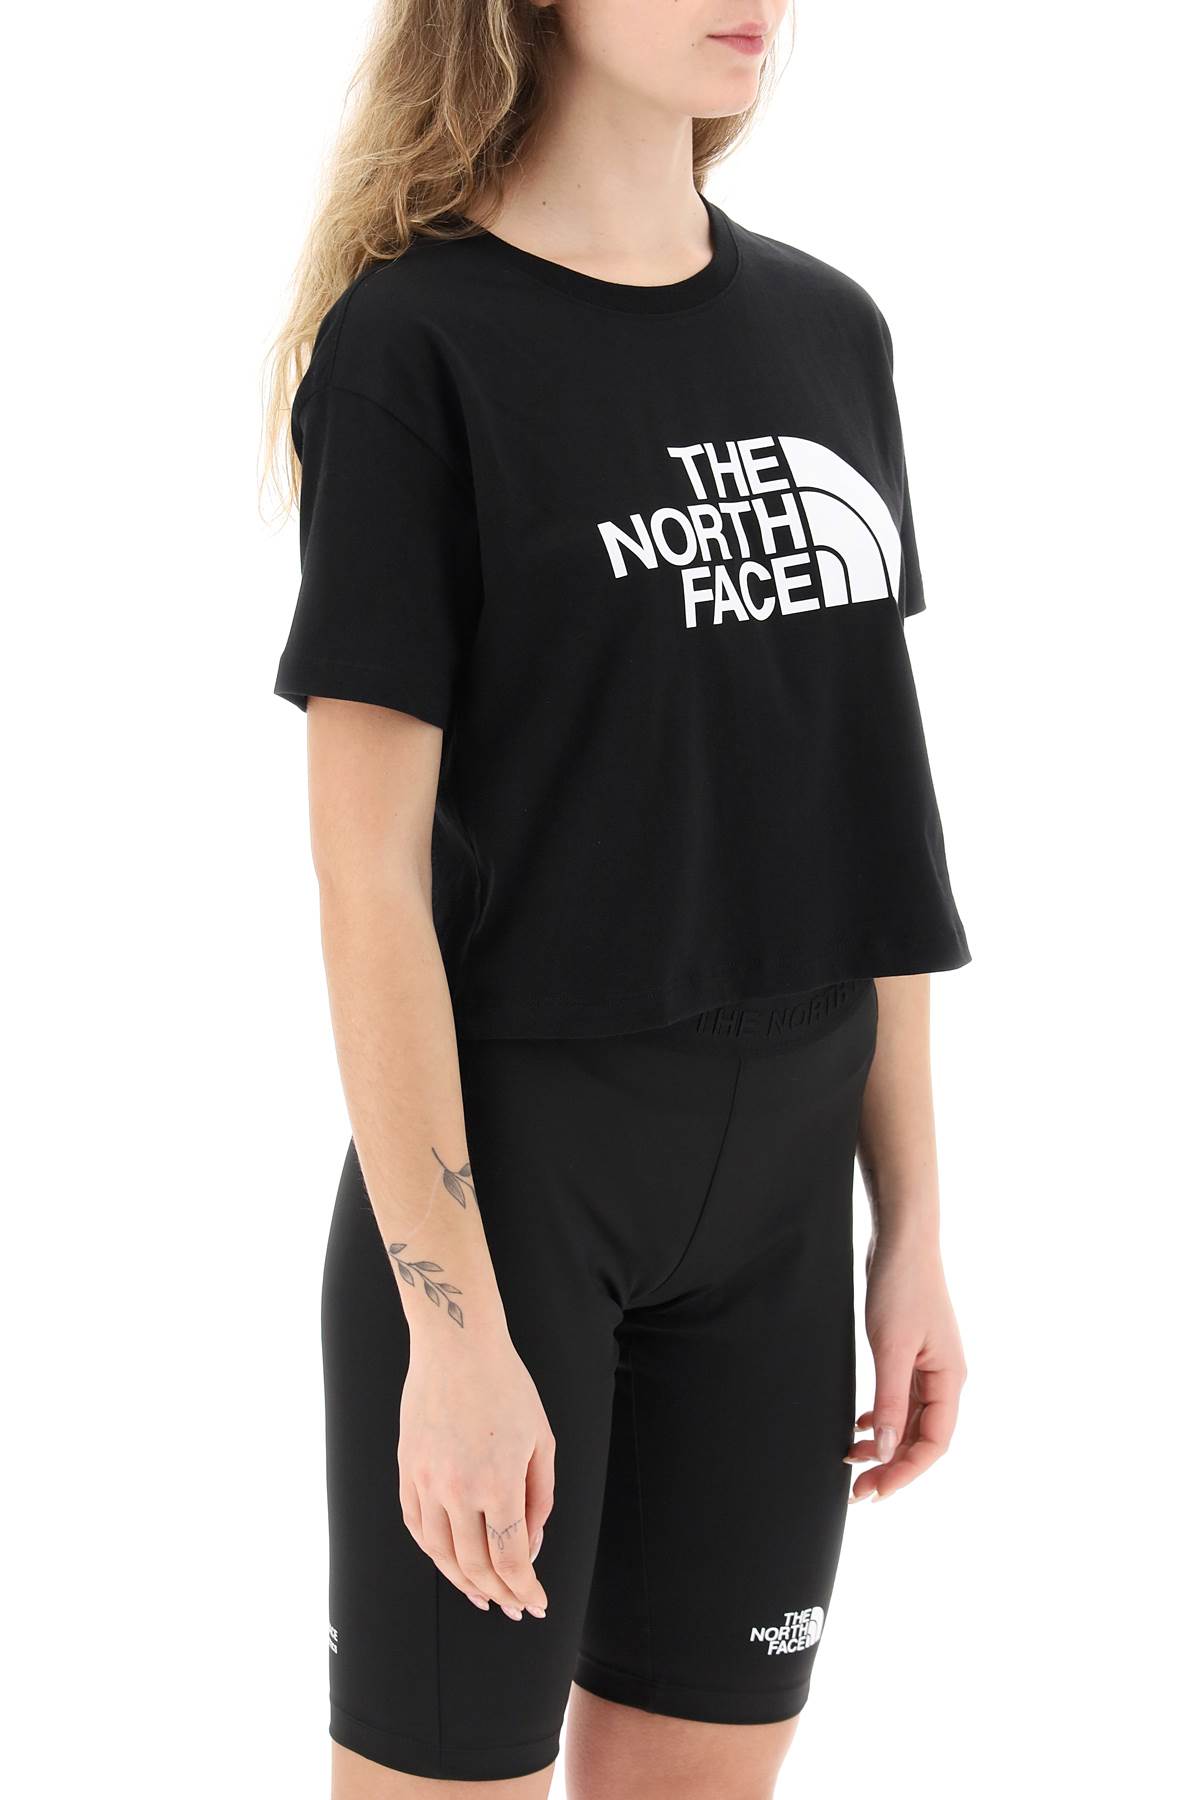 THE NORTH FACE LOGO PRINT EASY T-SHIRT 